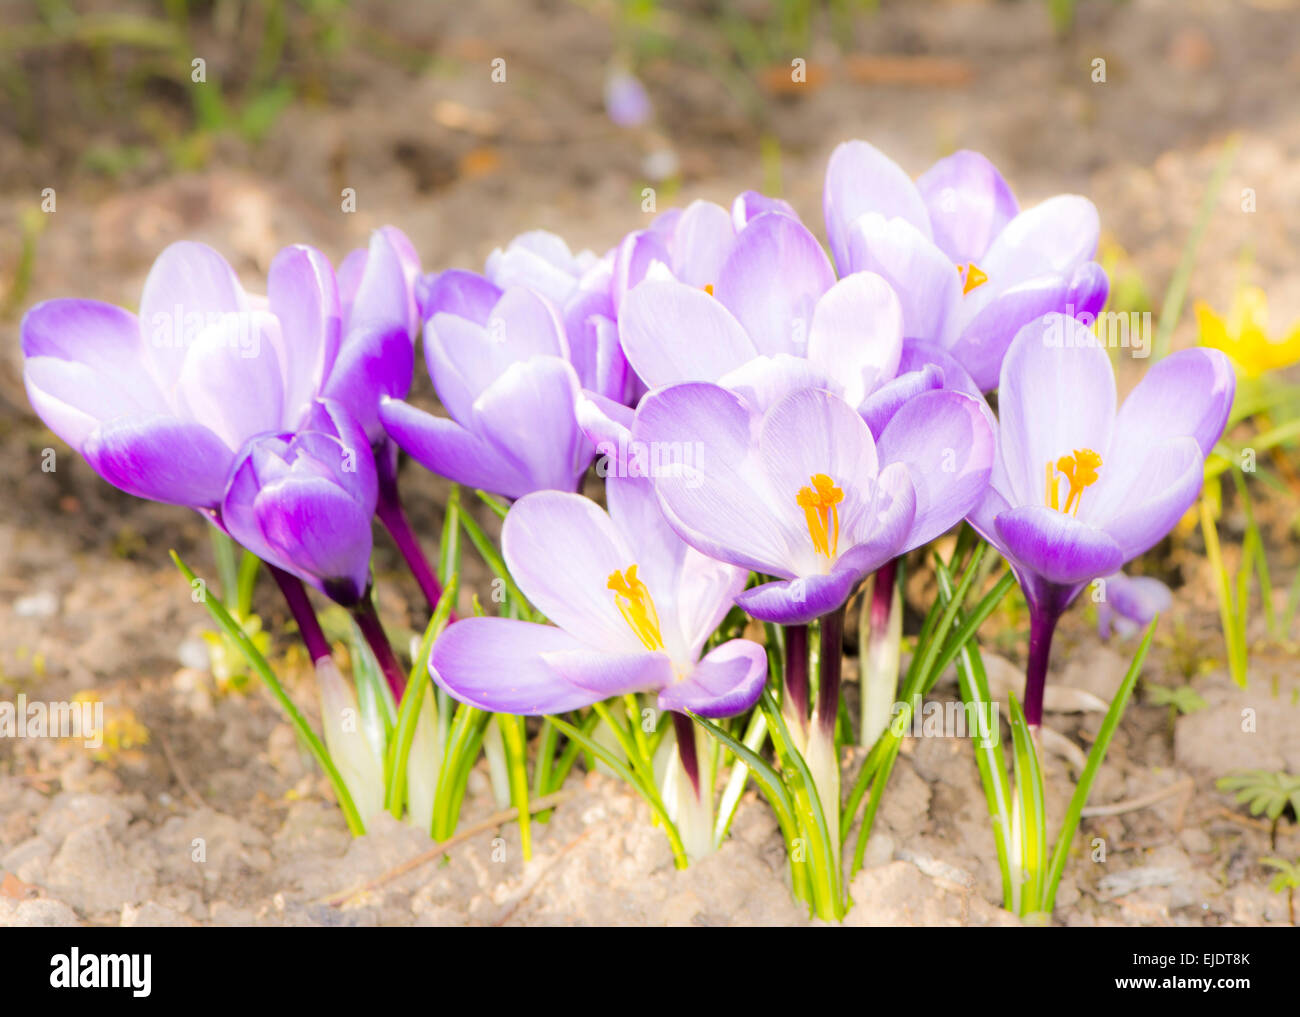 Macro of a group of purple crocus blossoms Stock Photo